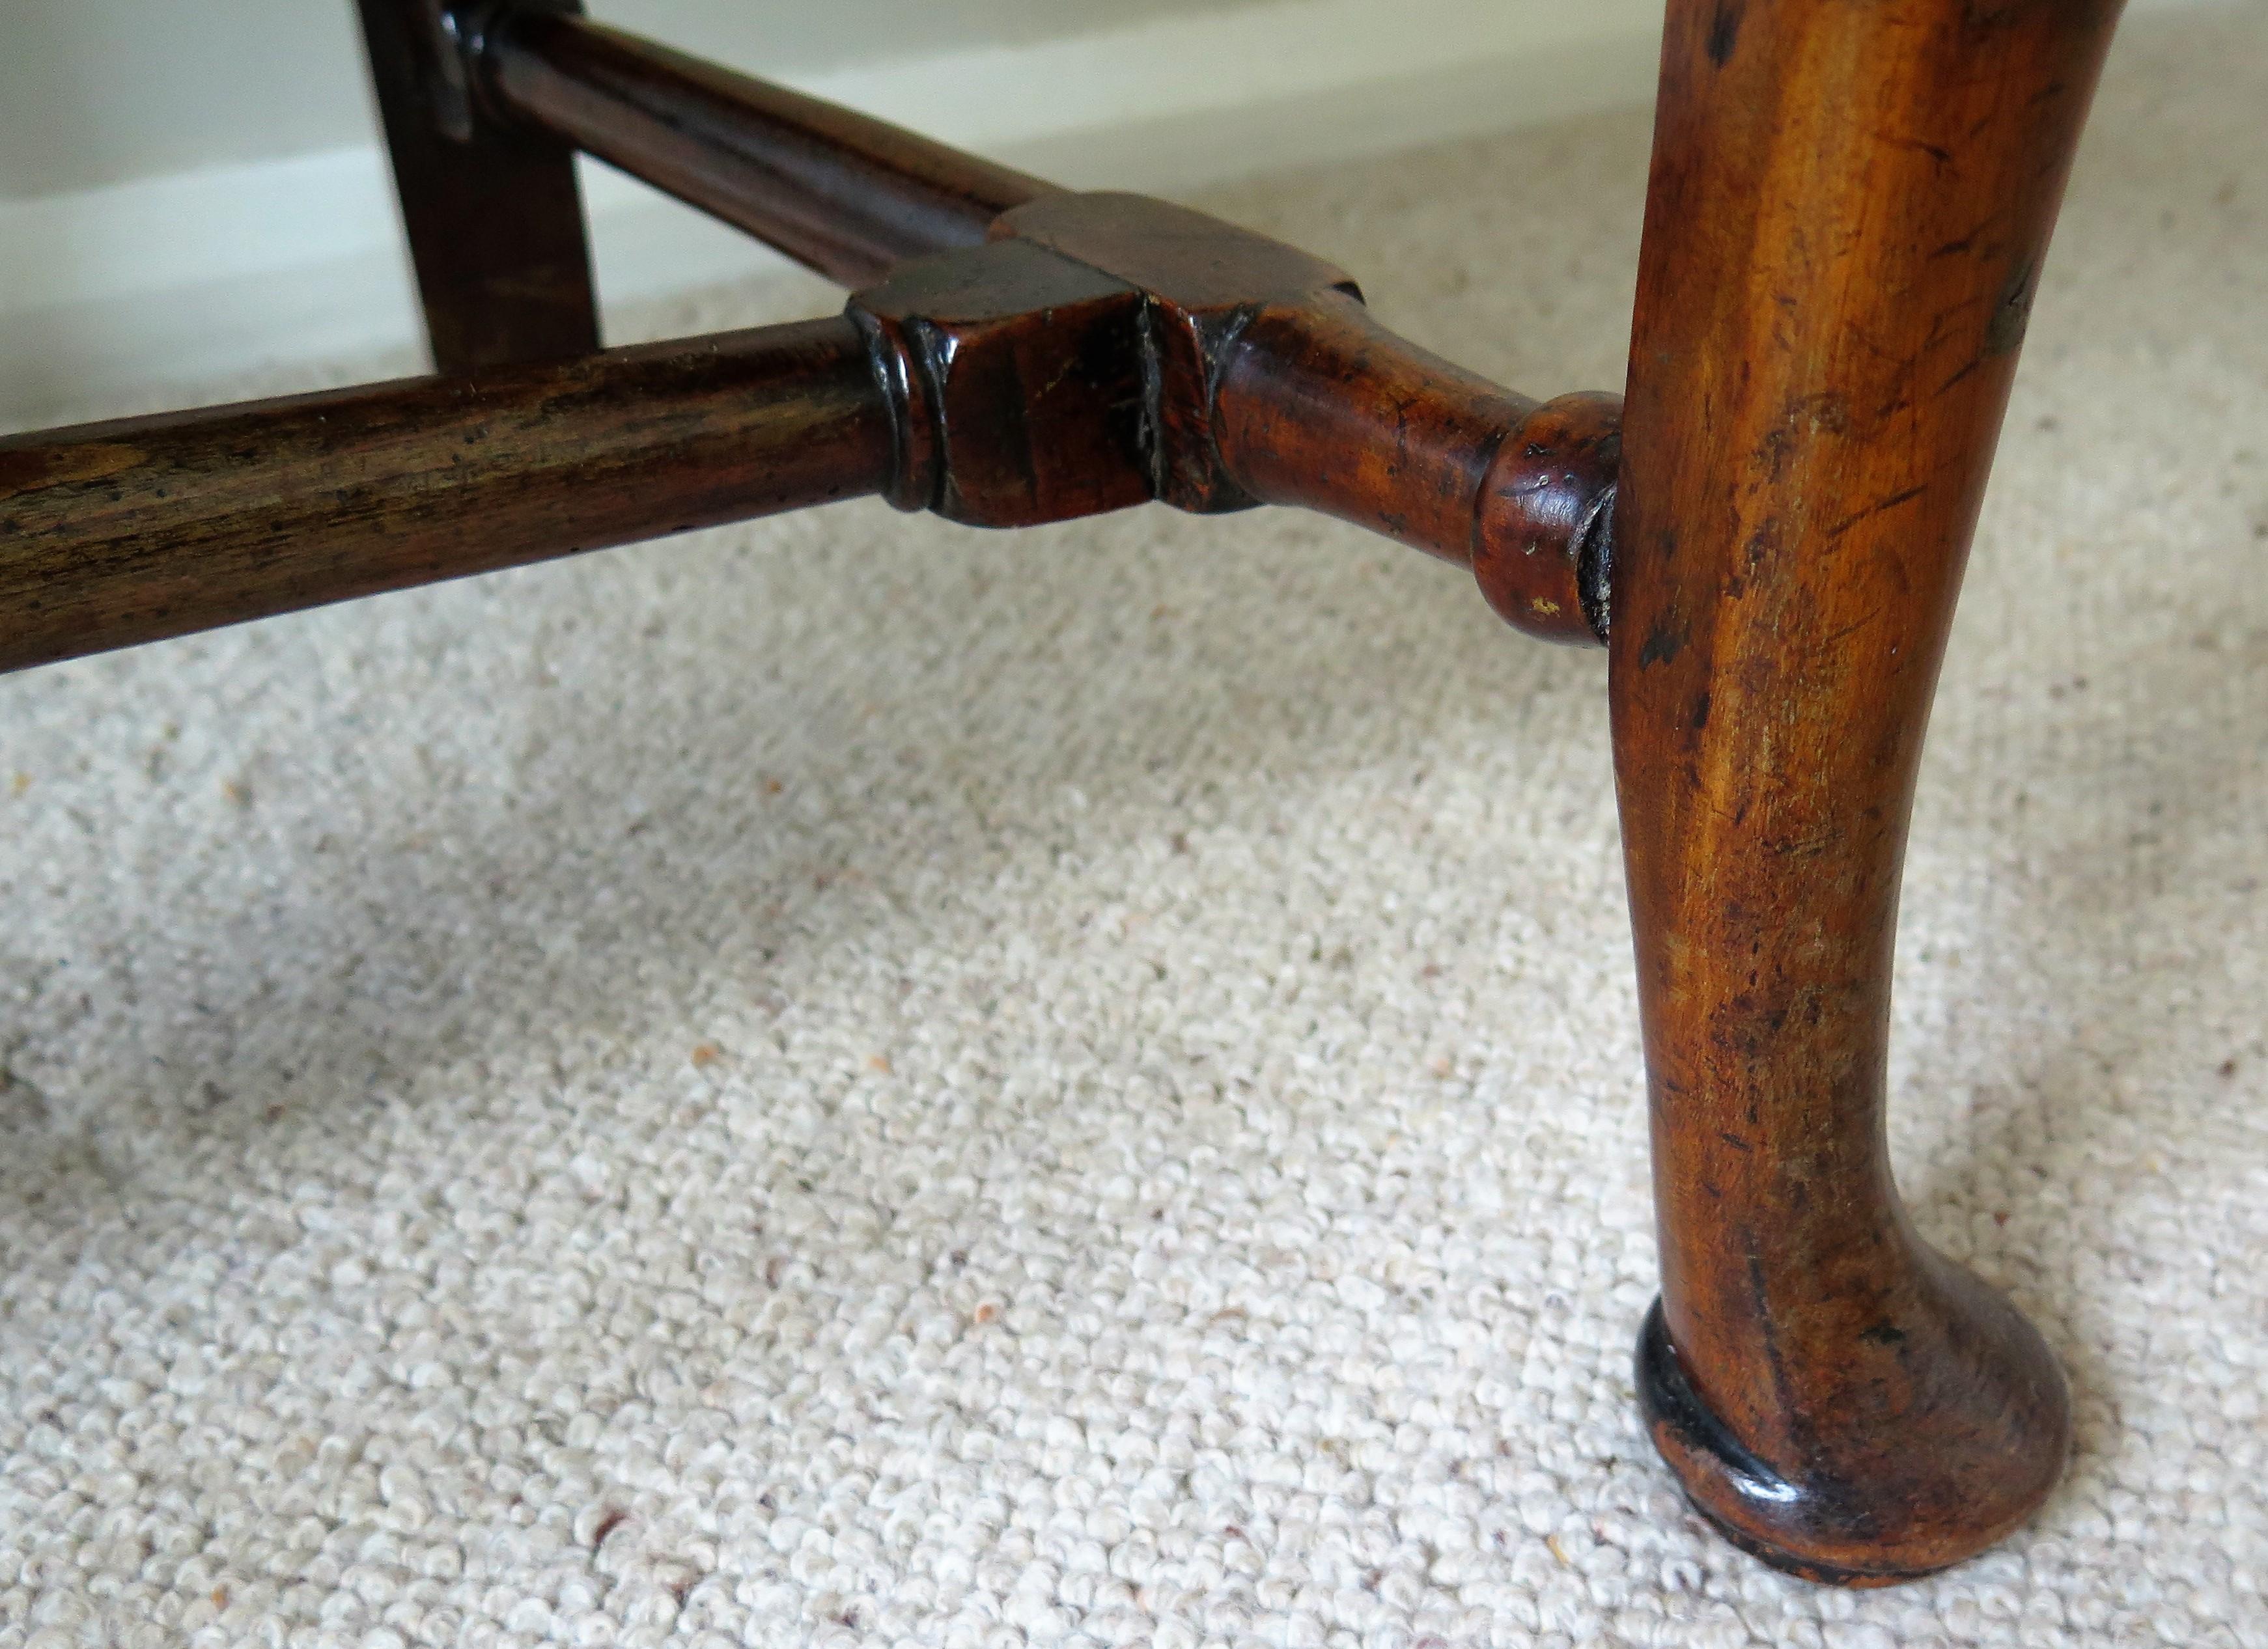 Queen Anne Period Walnut Chair Cabriole Legs and Stretchers, English circa 1700 For Sale 11